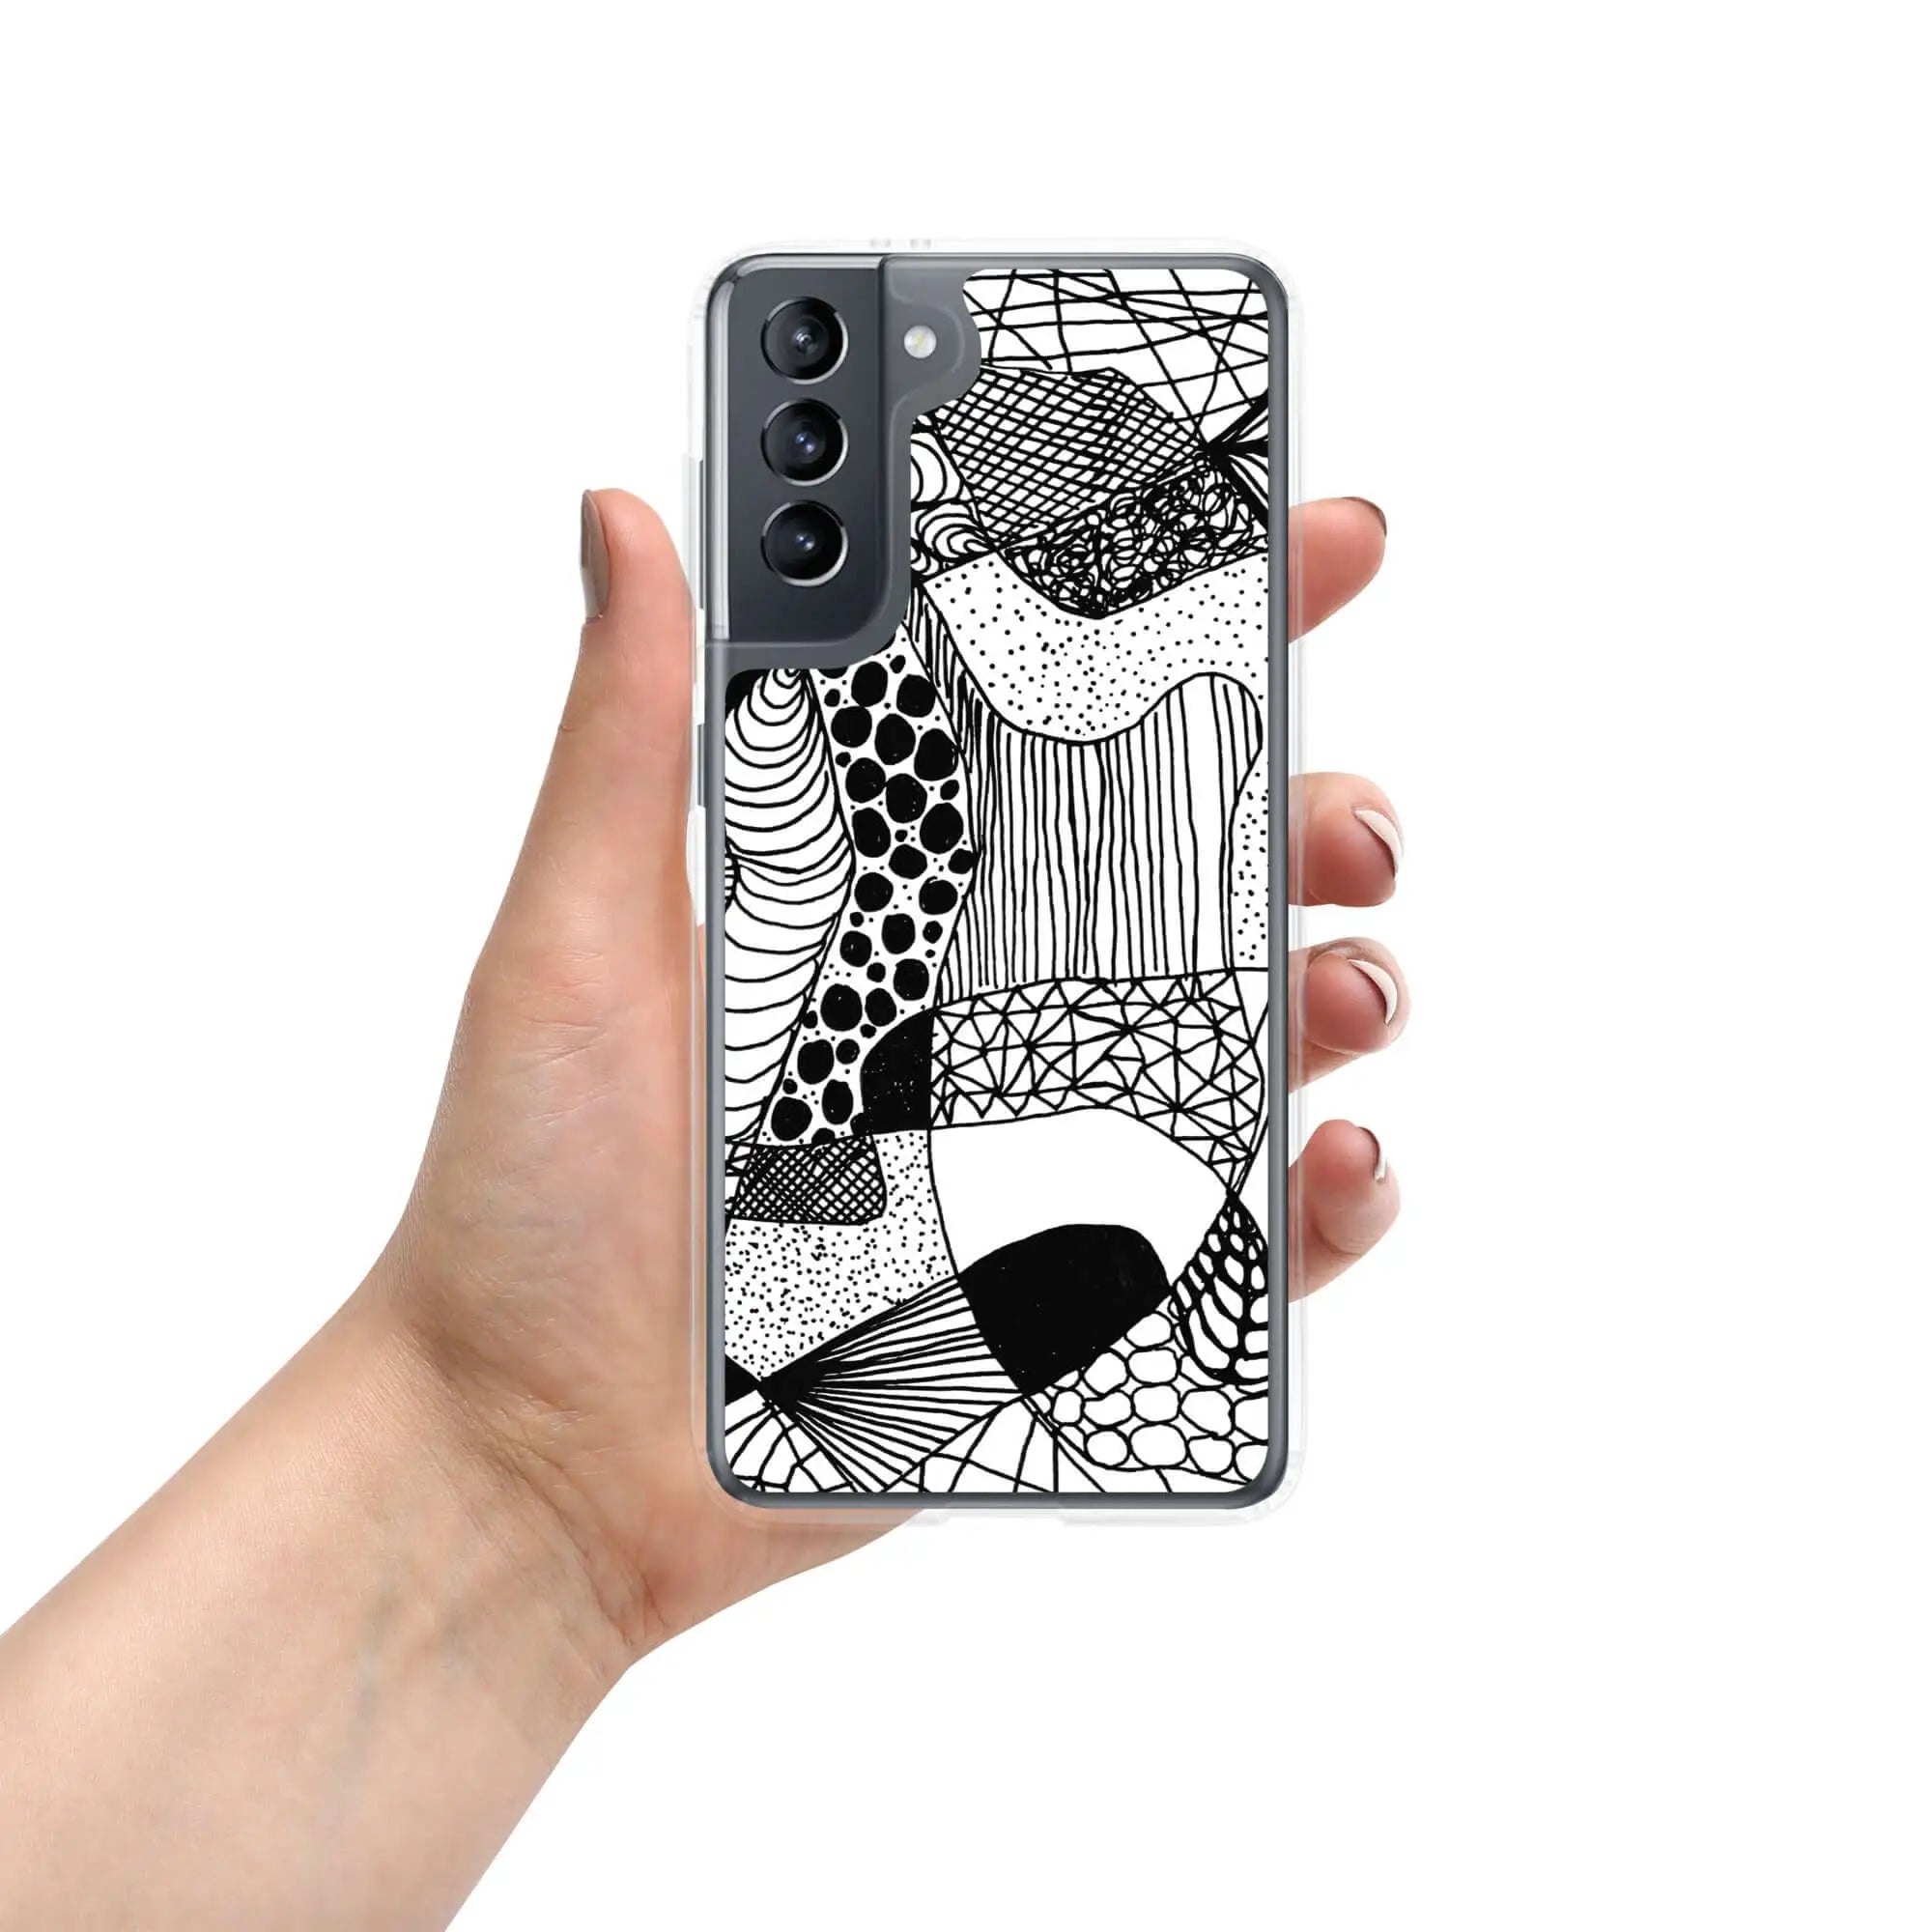 Samsung Case | Graphic Abstract - Black and white patterned phone case held in hand